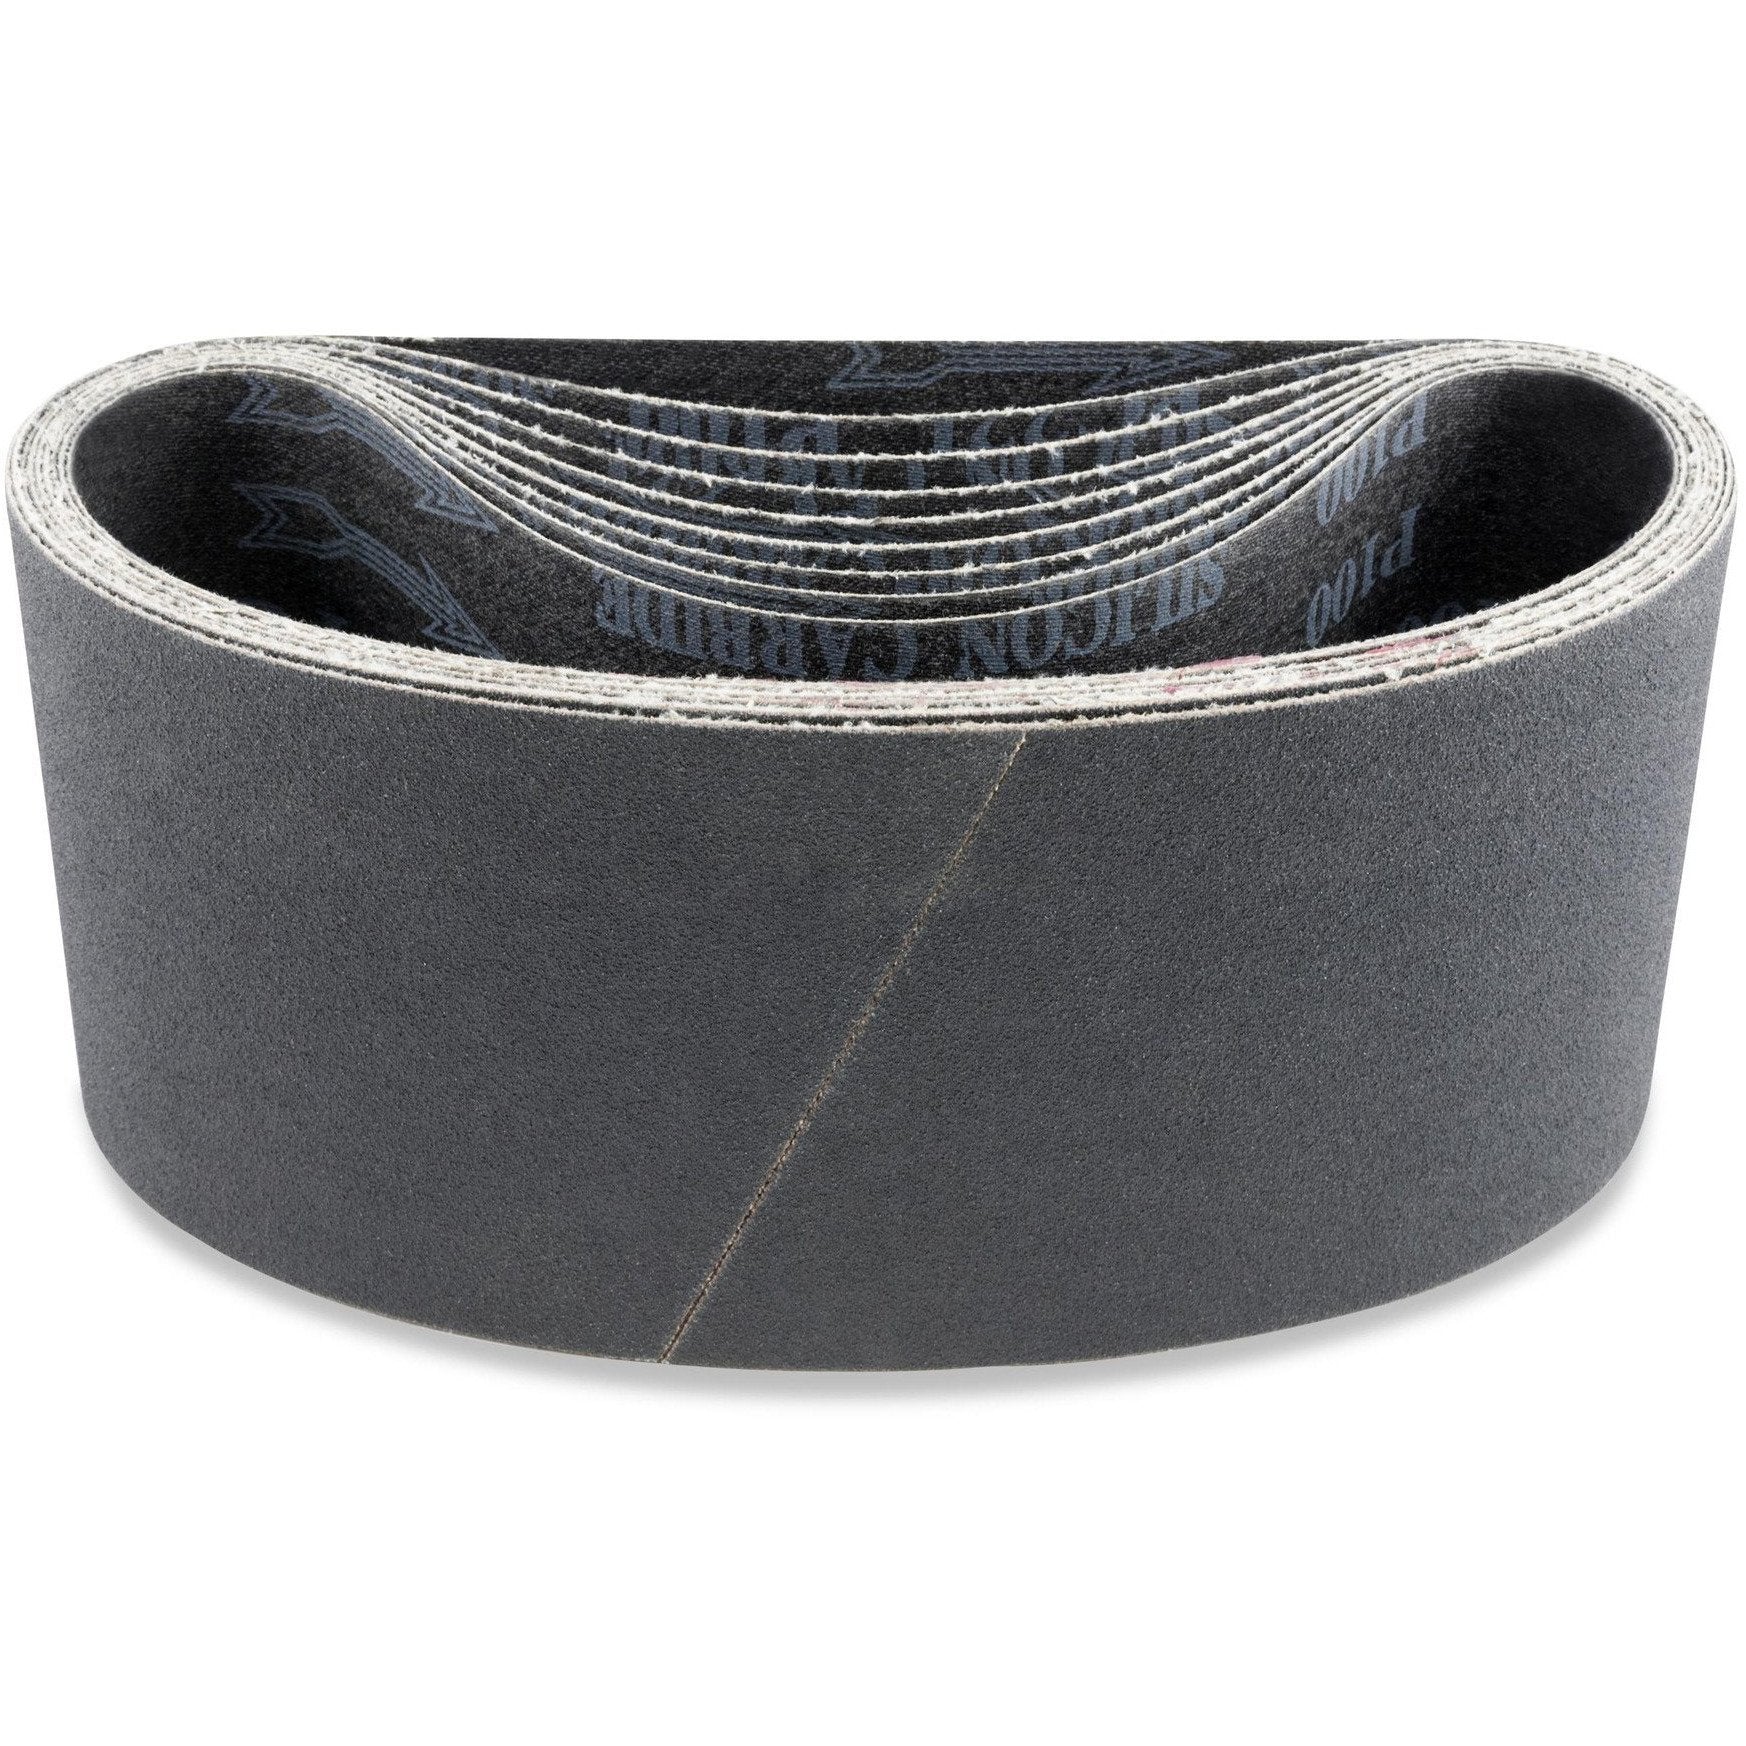 3 X 21 Inch Industrial Grade Silicon Carbide Sanding Belts, 8 Pack - Red Label Abrasives